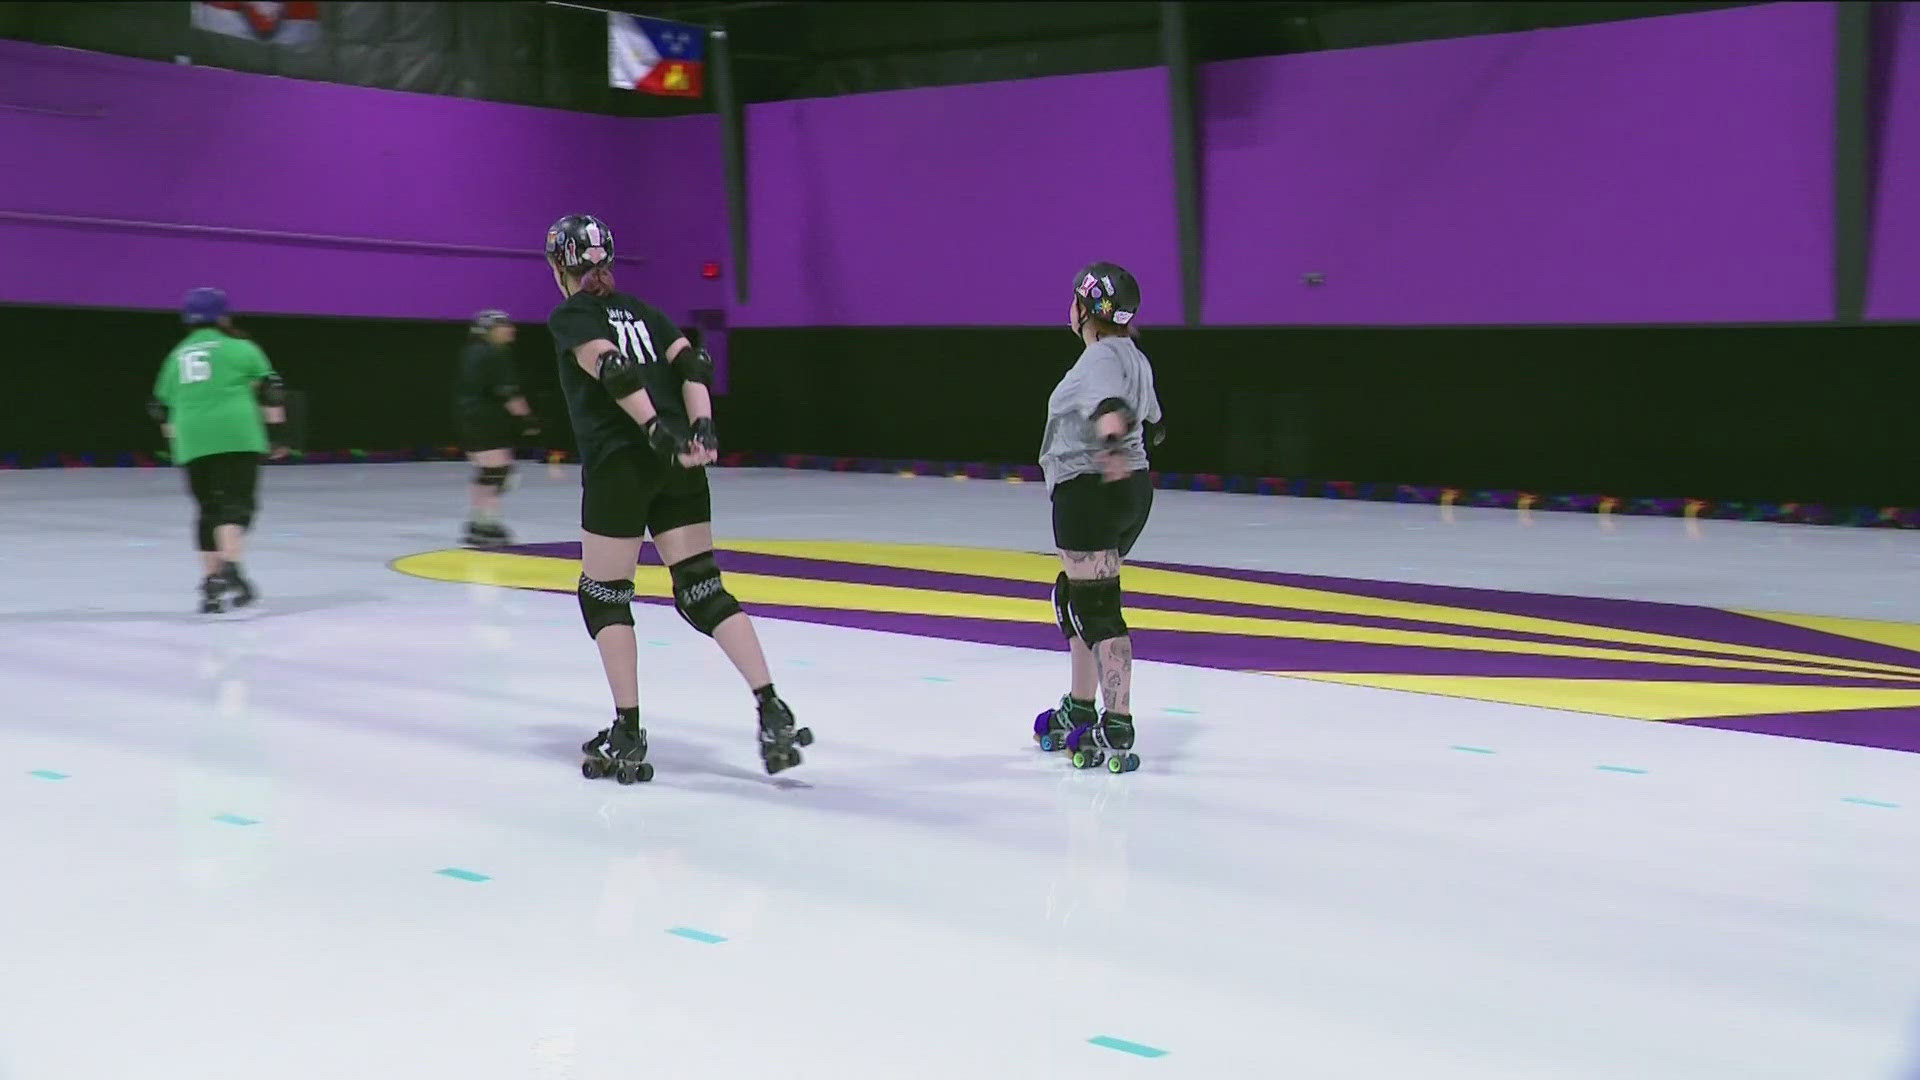 The all-female roller derby league has been promoting strength, athleticism, and community involvement since 2007.